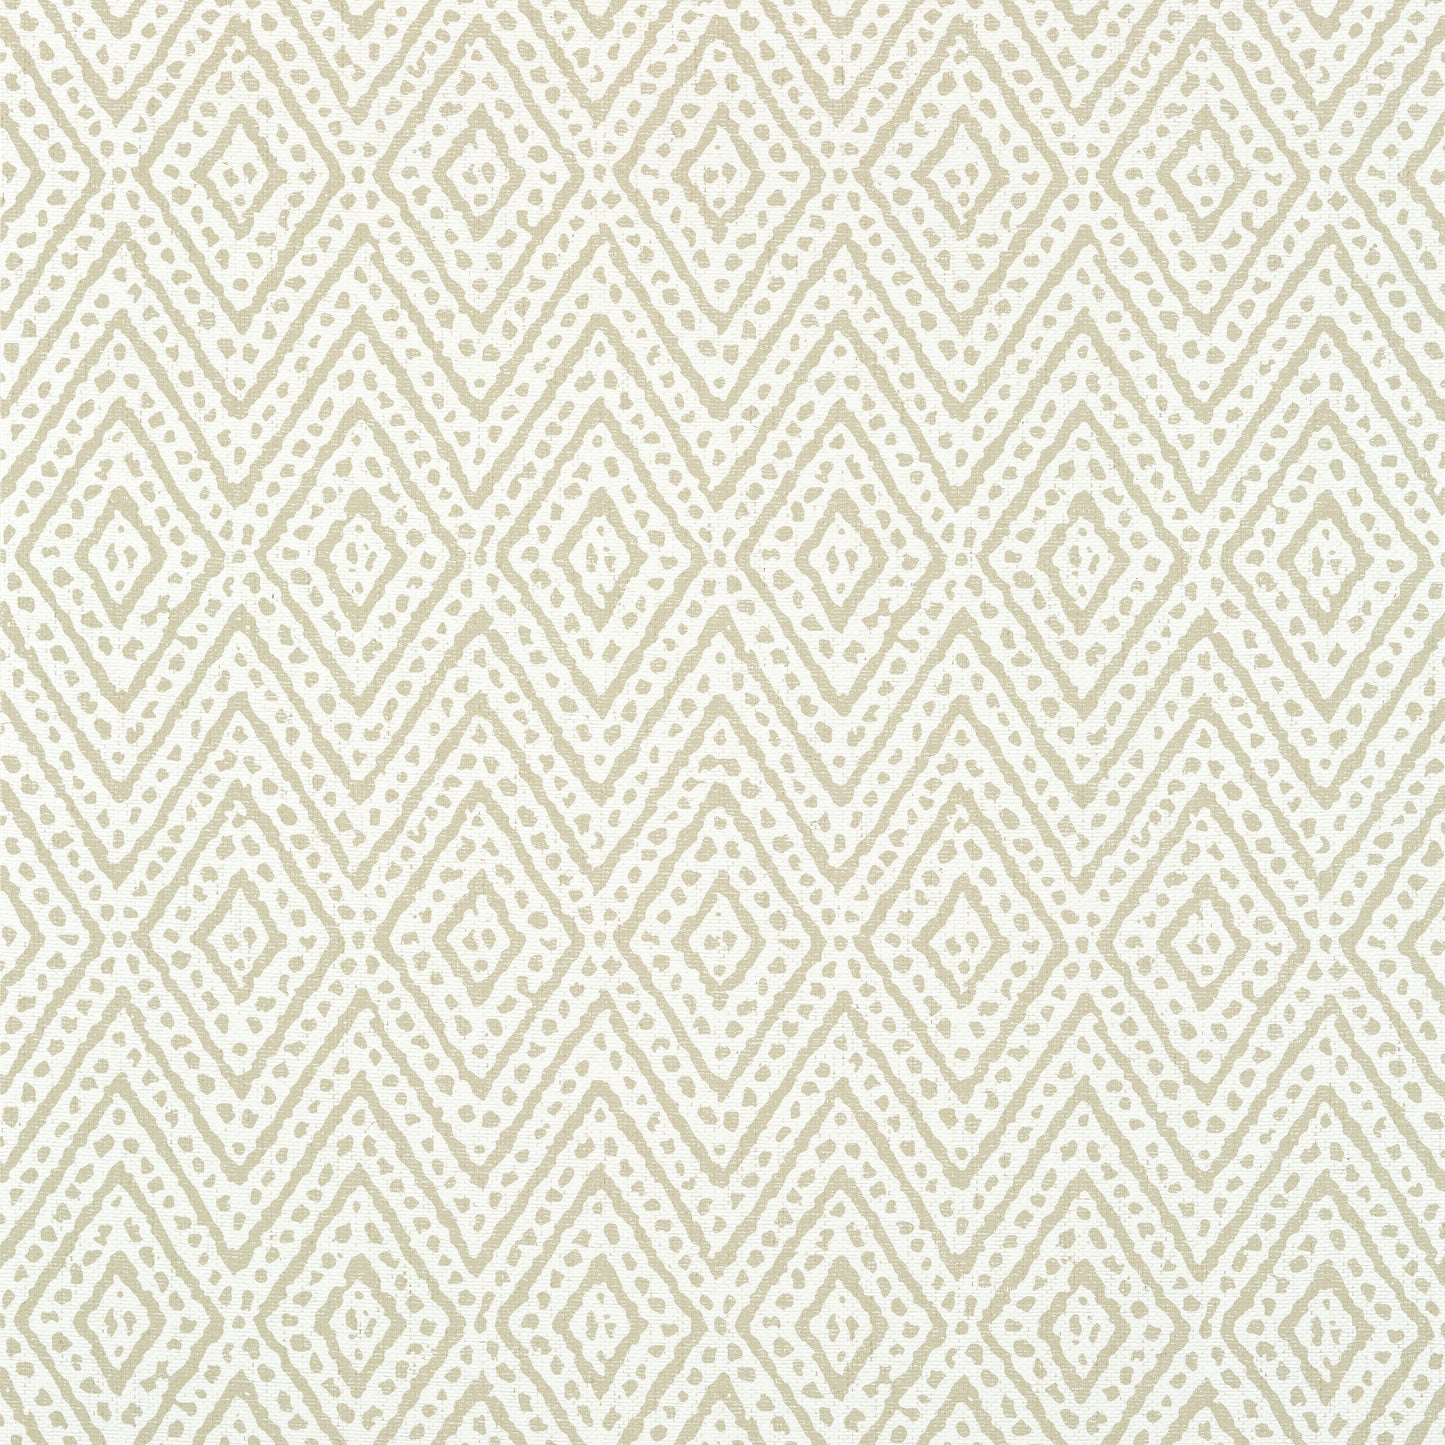 Purchase  Ann French Wallpaper Item AT78762 pattern name  Vero